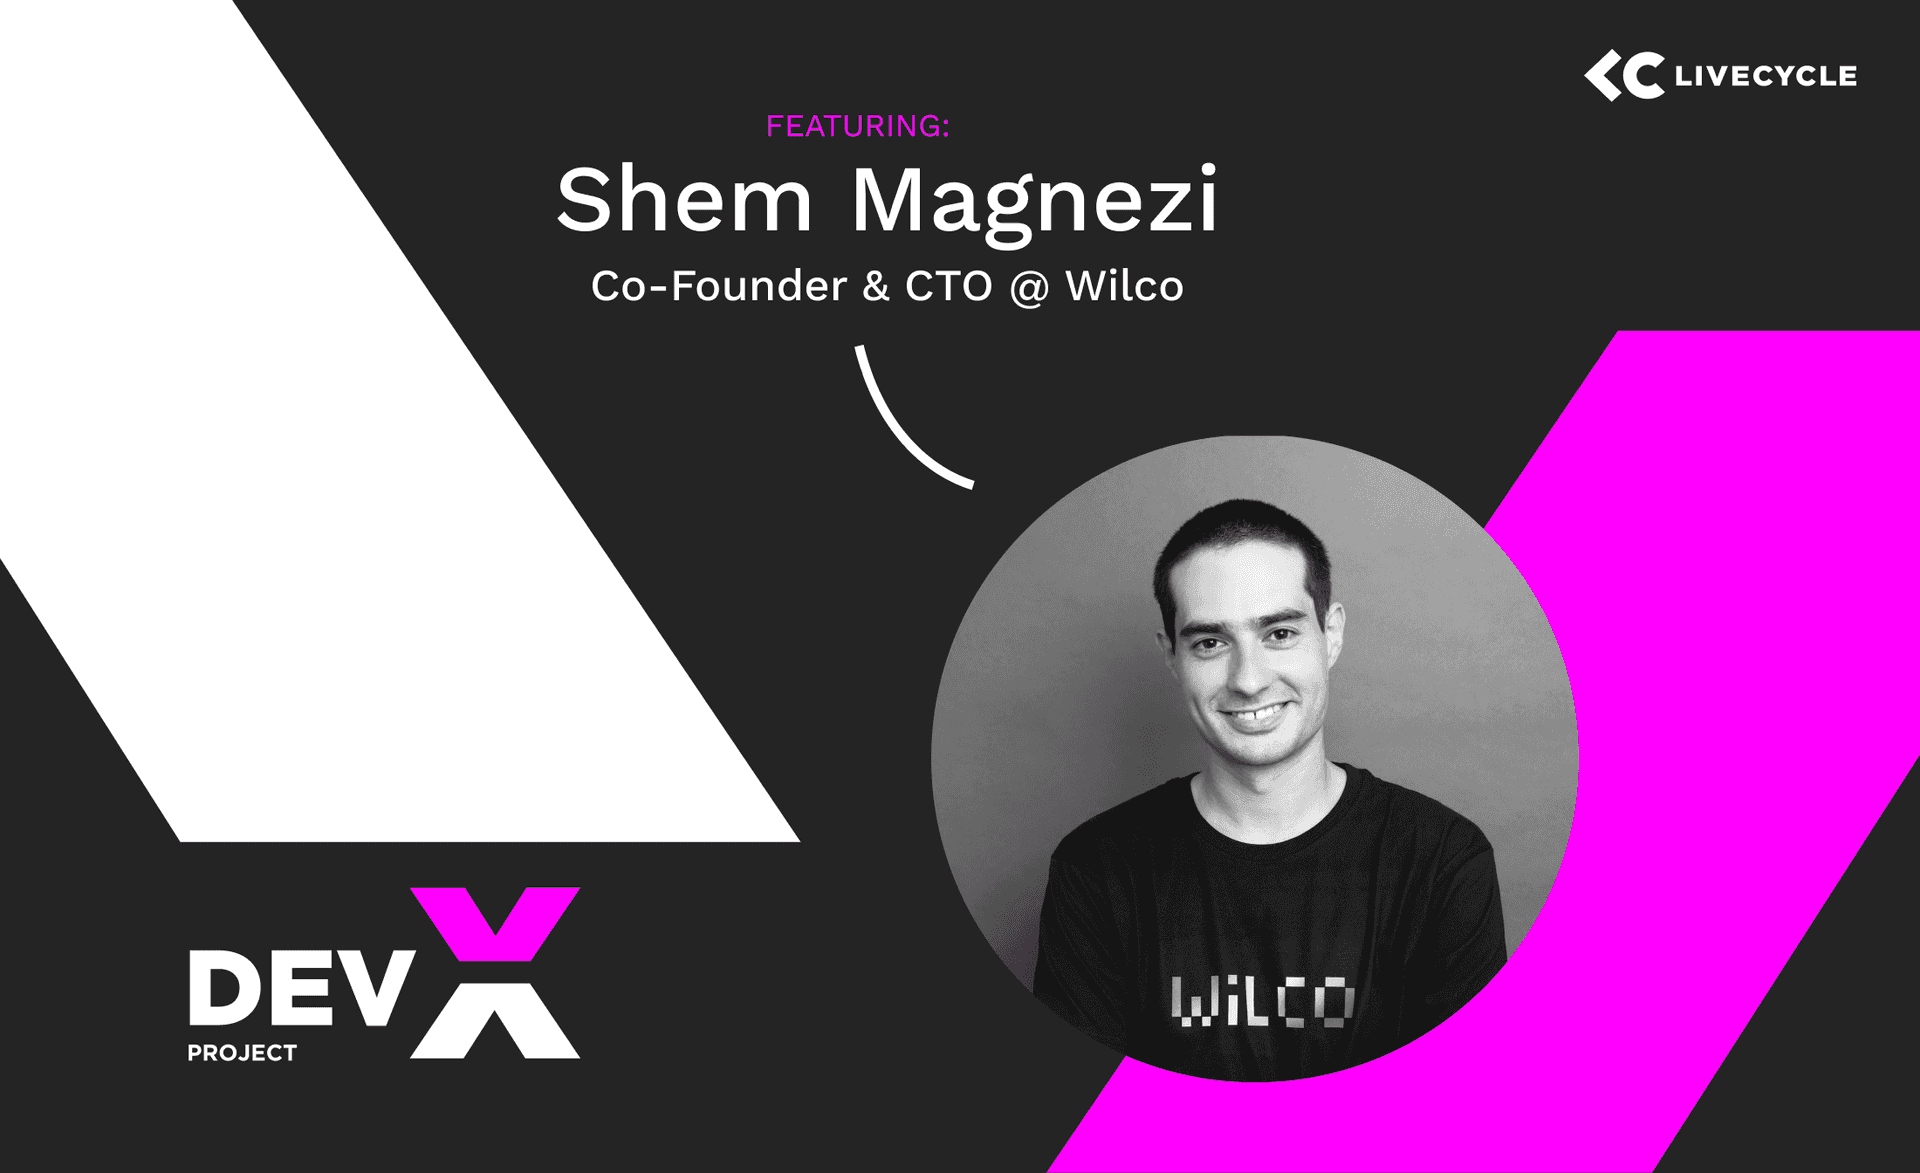 The Dev-X Project: Featuring Shem Magnezi